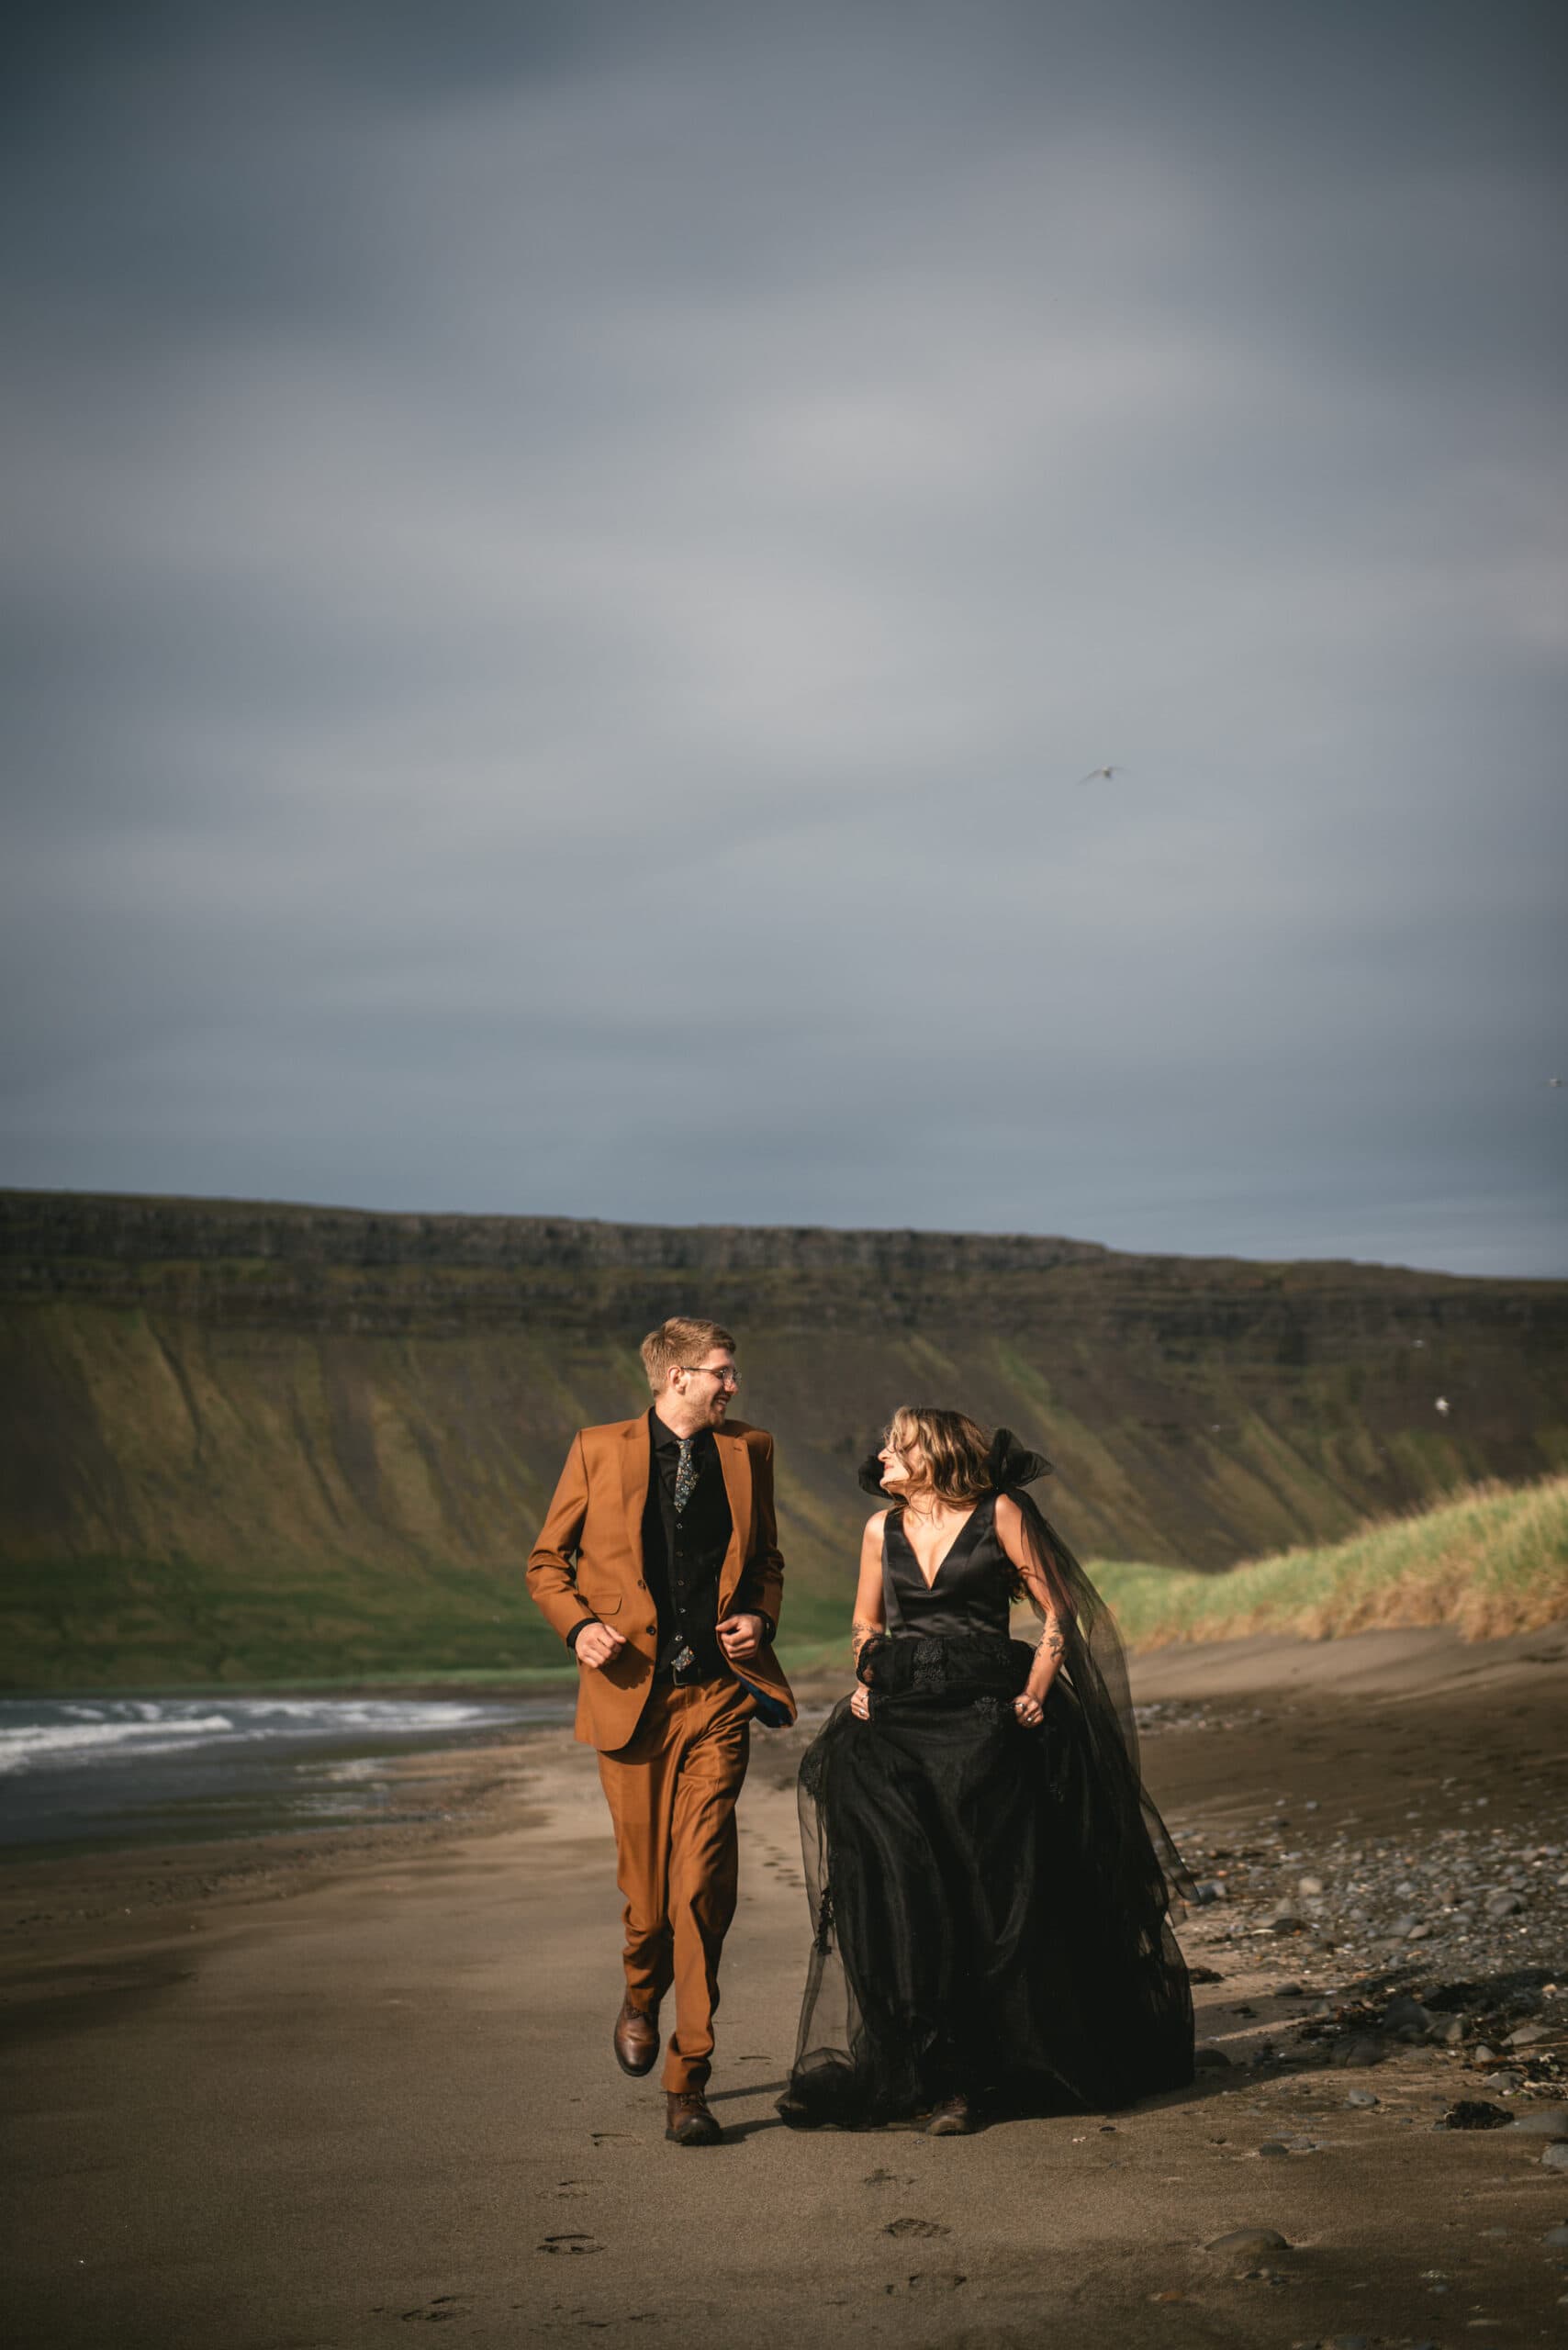 Candid shot of the couple's joyful celebration in the heart of the Westfjords.